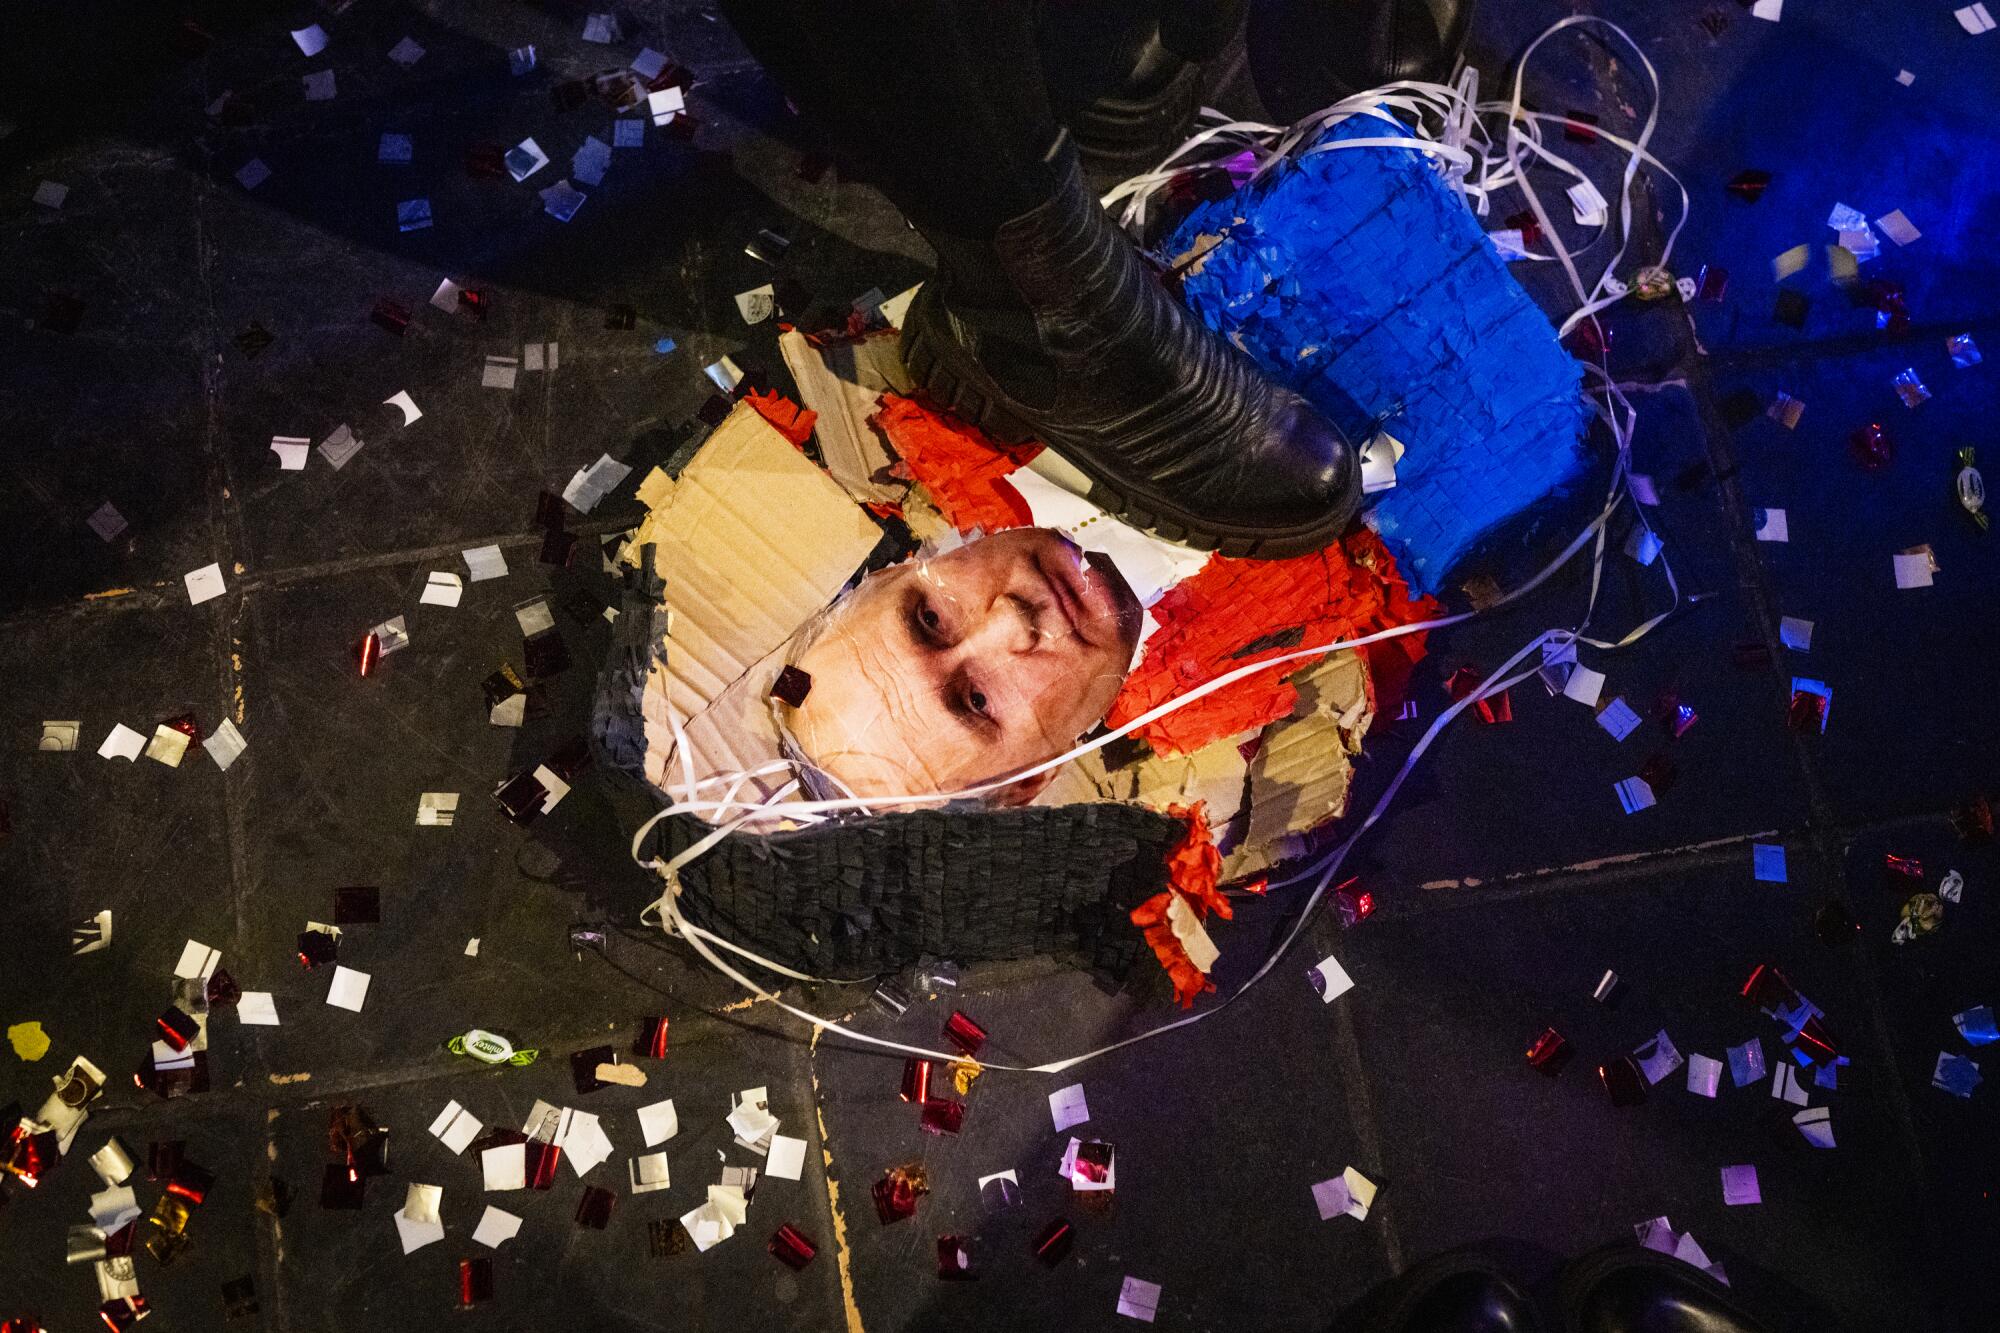 A smashed piata featuring the face of Vladimir Putin on the floor of a bar 